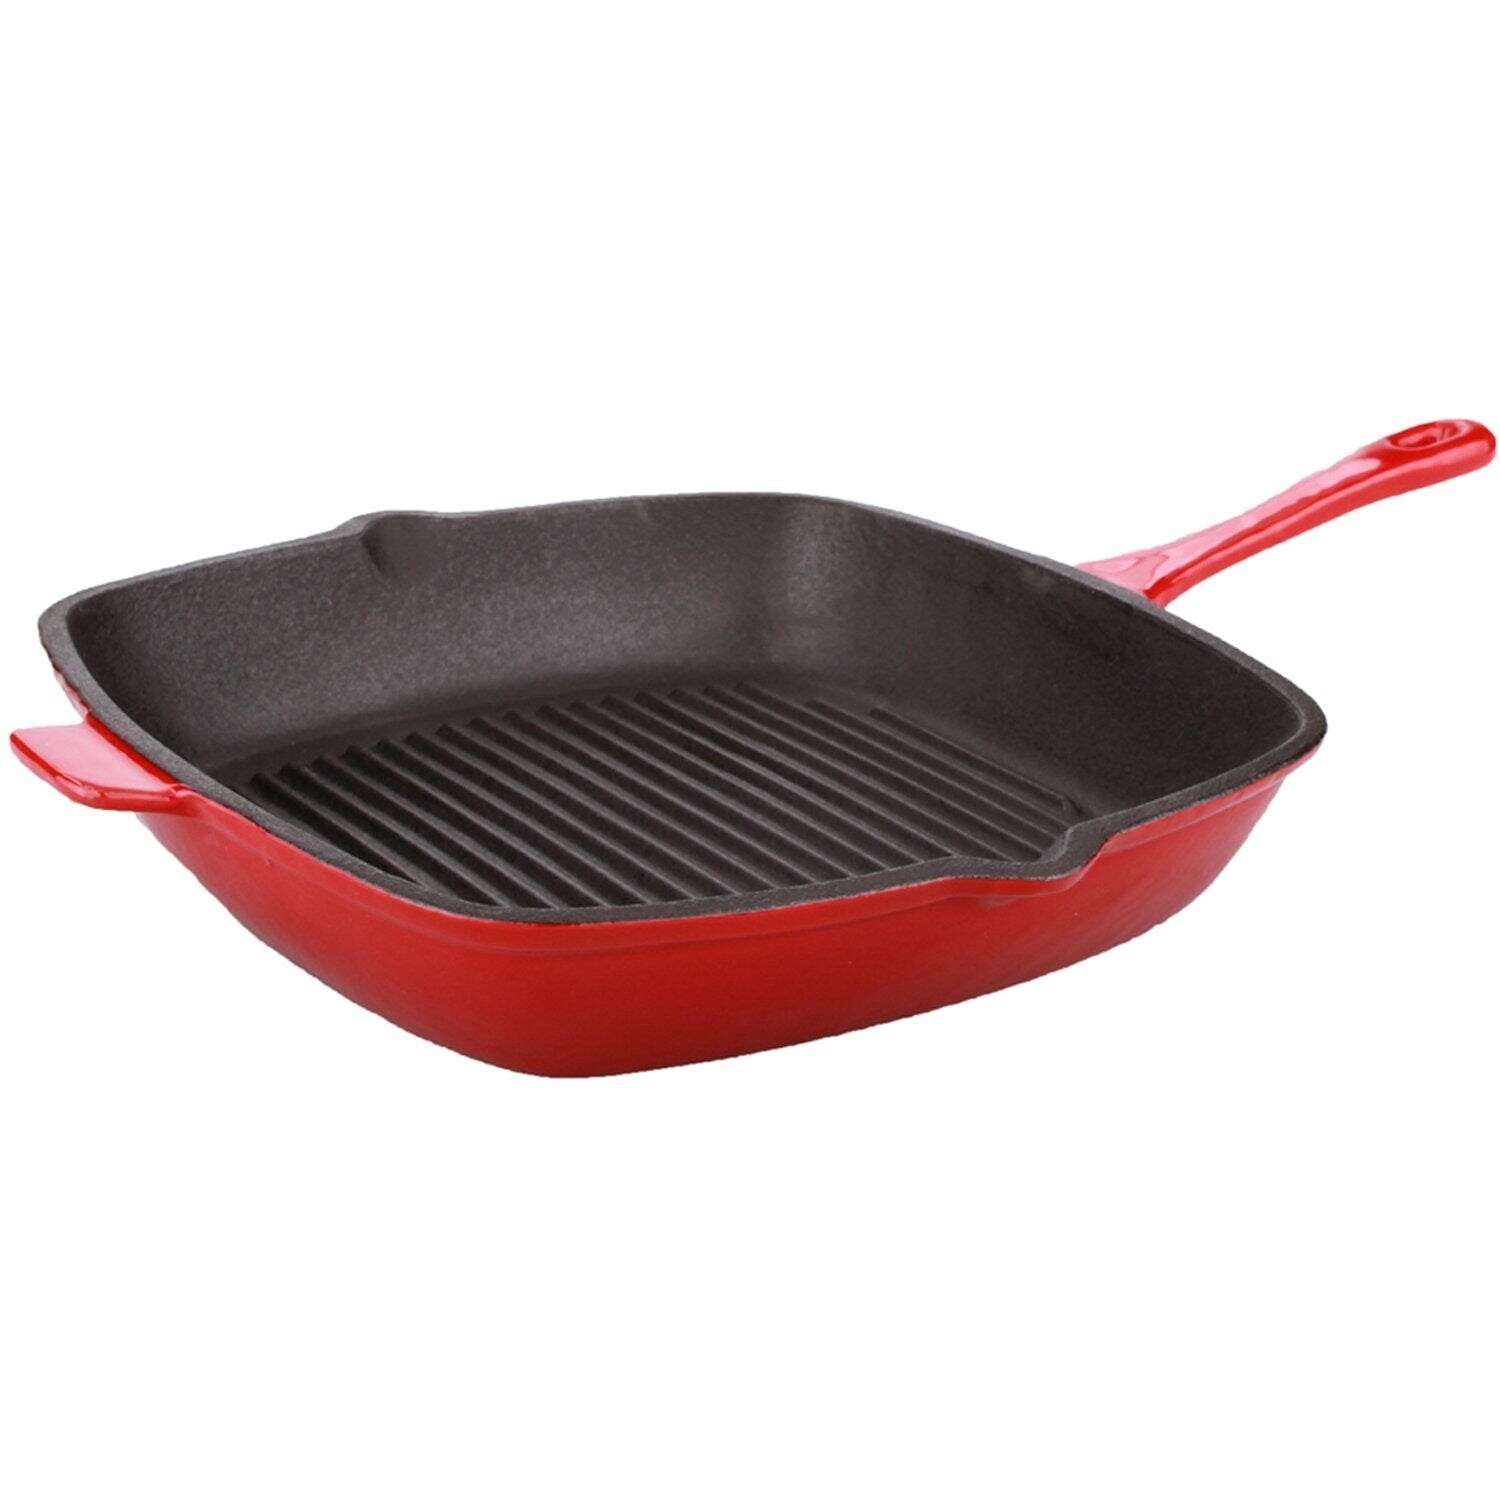 https://ak1.ostkcdn.com/images/products/is/images/direct/97a22f7d16b59fbb85dcae76aa4658e45a15ea41/Neo-Cast-Iron-Sq-Grill-Pan%2C-11%22.jpg